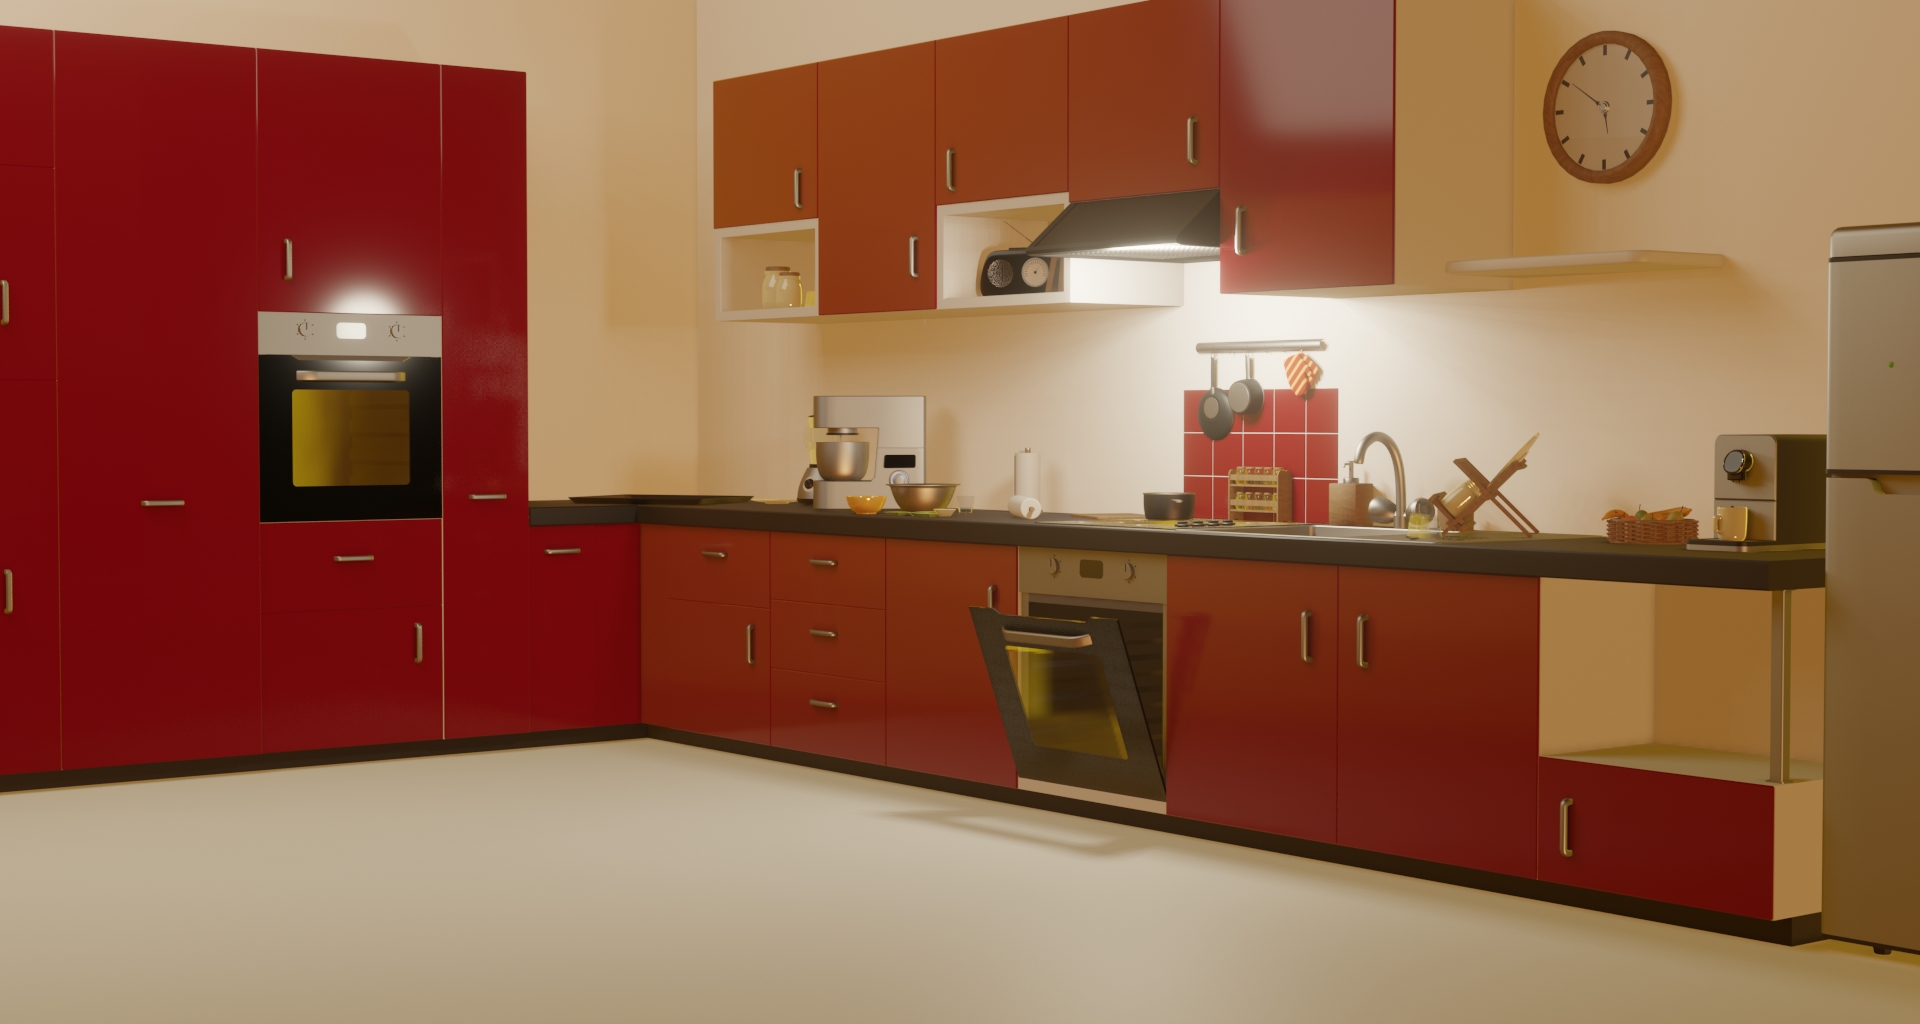 Kitchen cabinets preview image 1